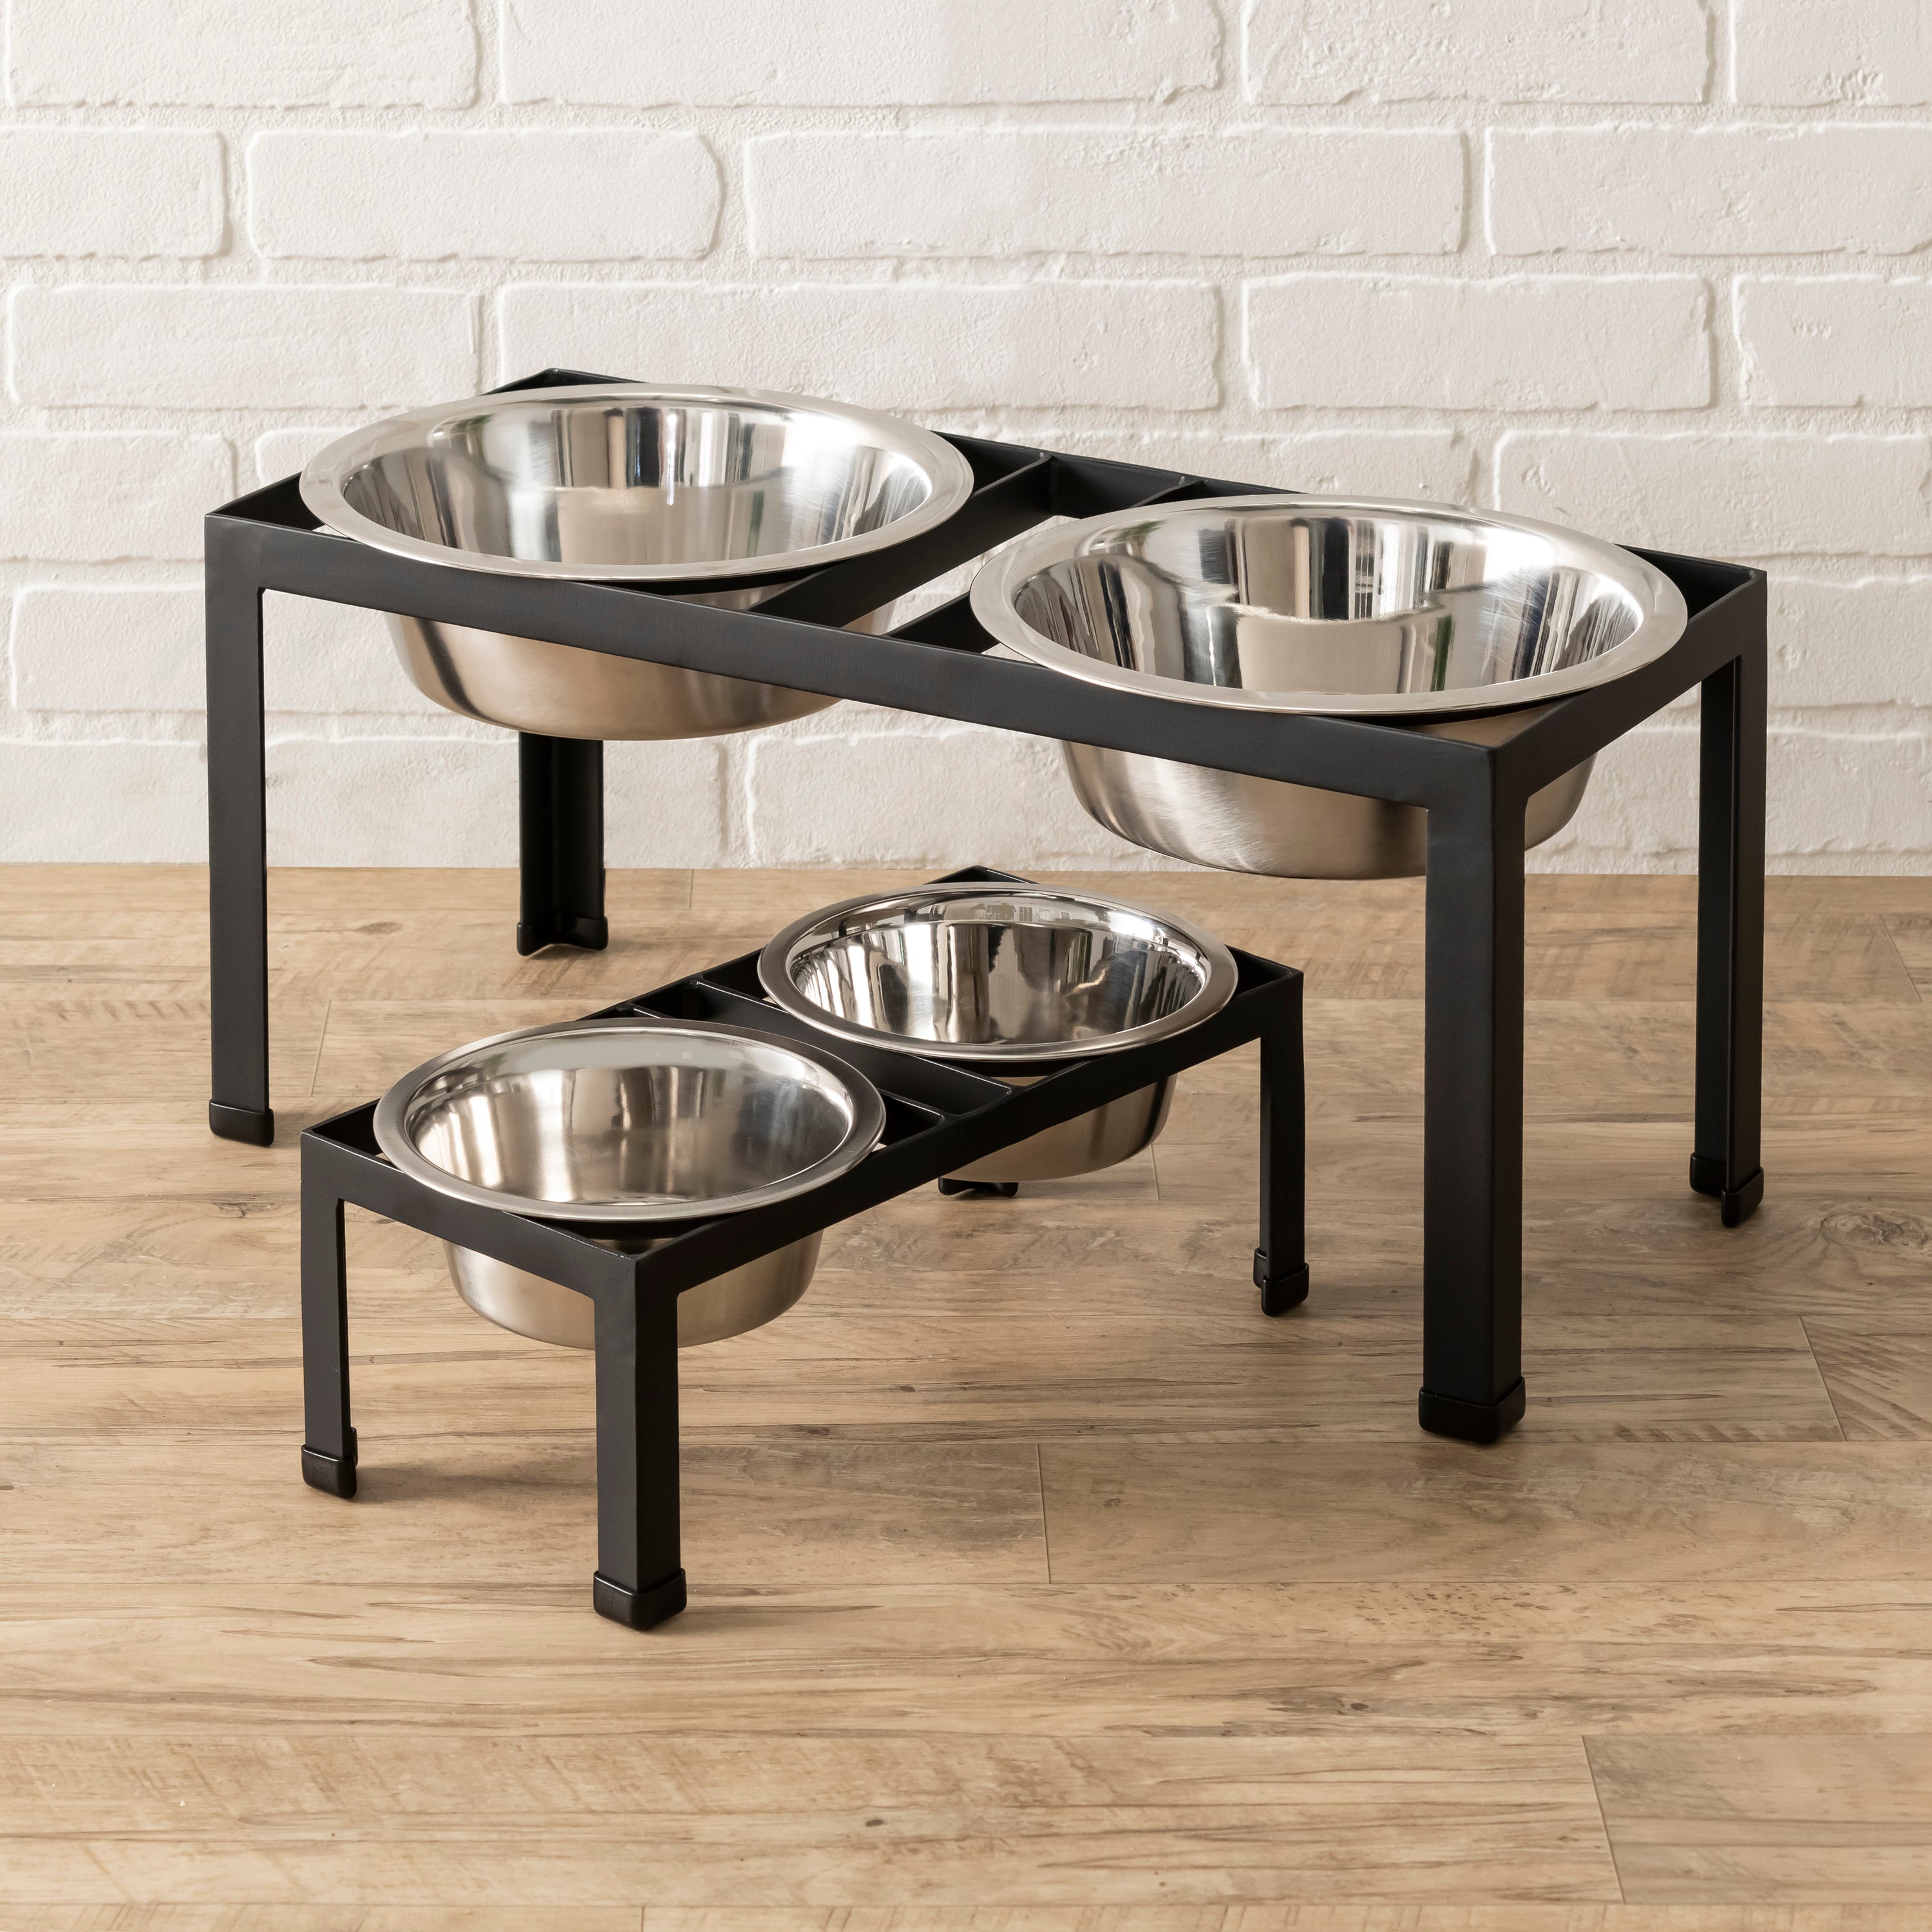 Modern Elevated Dog Bowls for Large Dogs. Raised Dog Bowl Stand